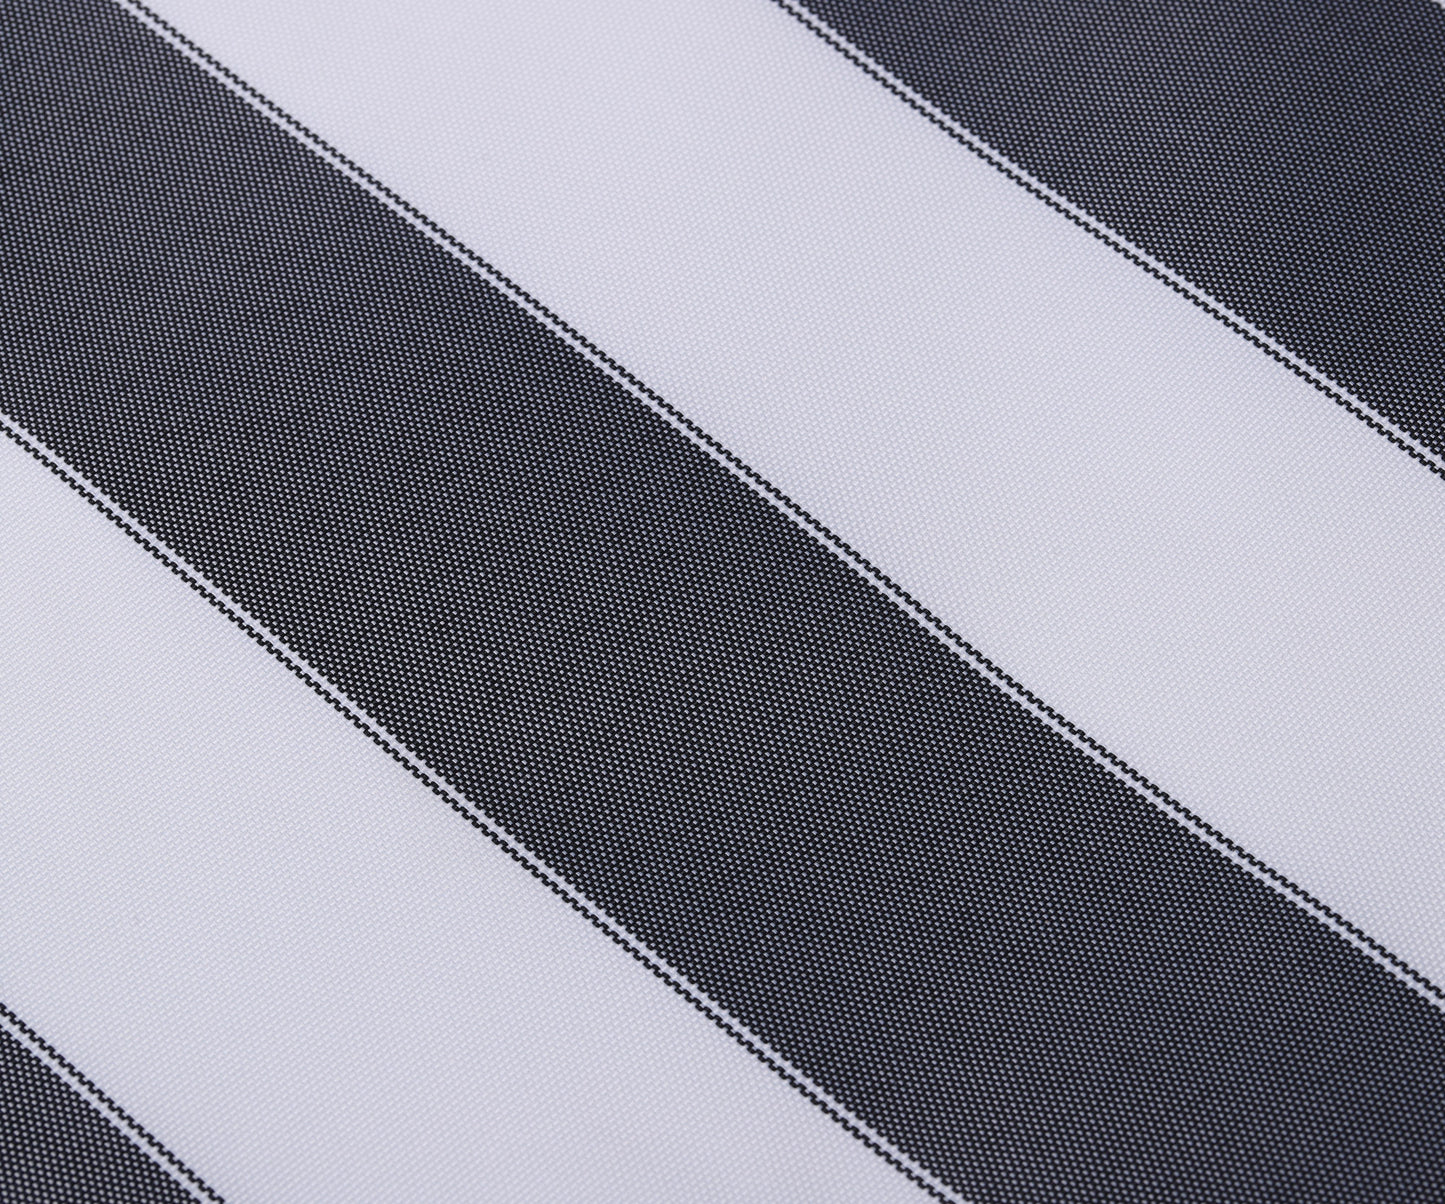 STRIPE CANVAS AWNING FABRIC WATERPROOF OUTDOOR FABRIC 60" BLACK/WHTE (1 yards)